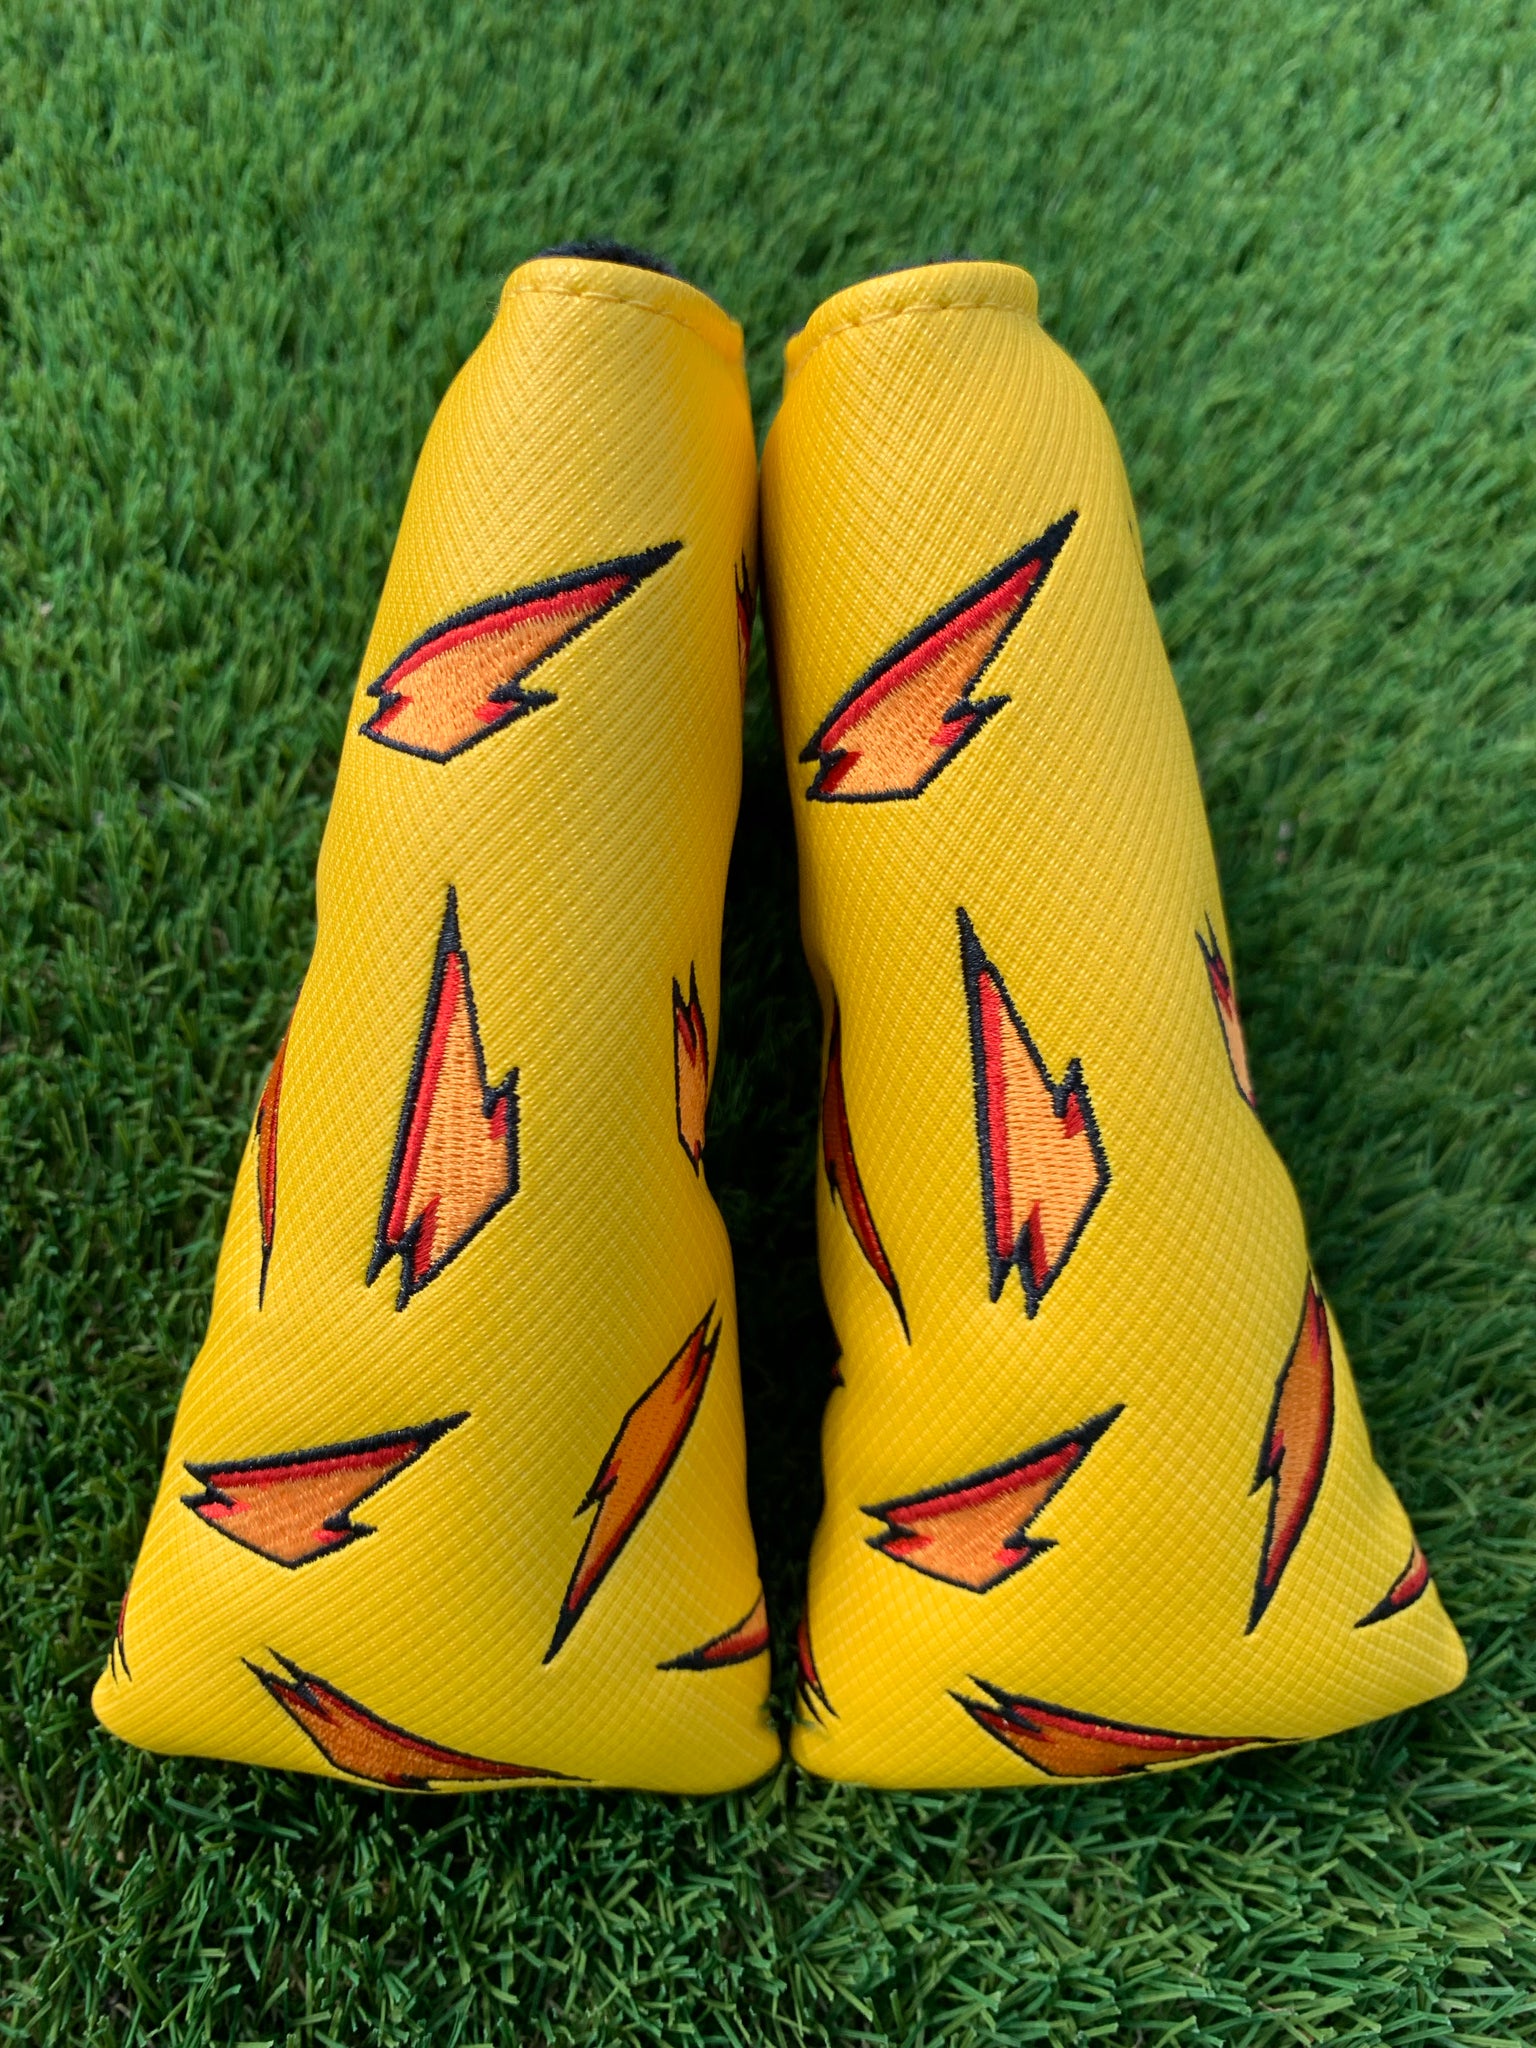 Grindade Blade Putter Cover - Magnetic - Yellow “Lemon Lime”